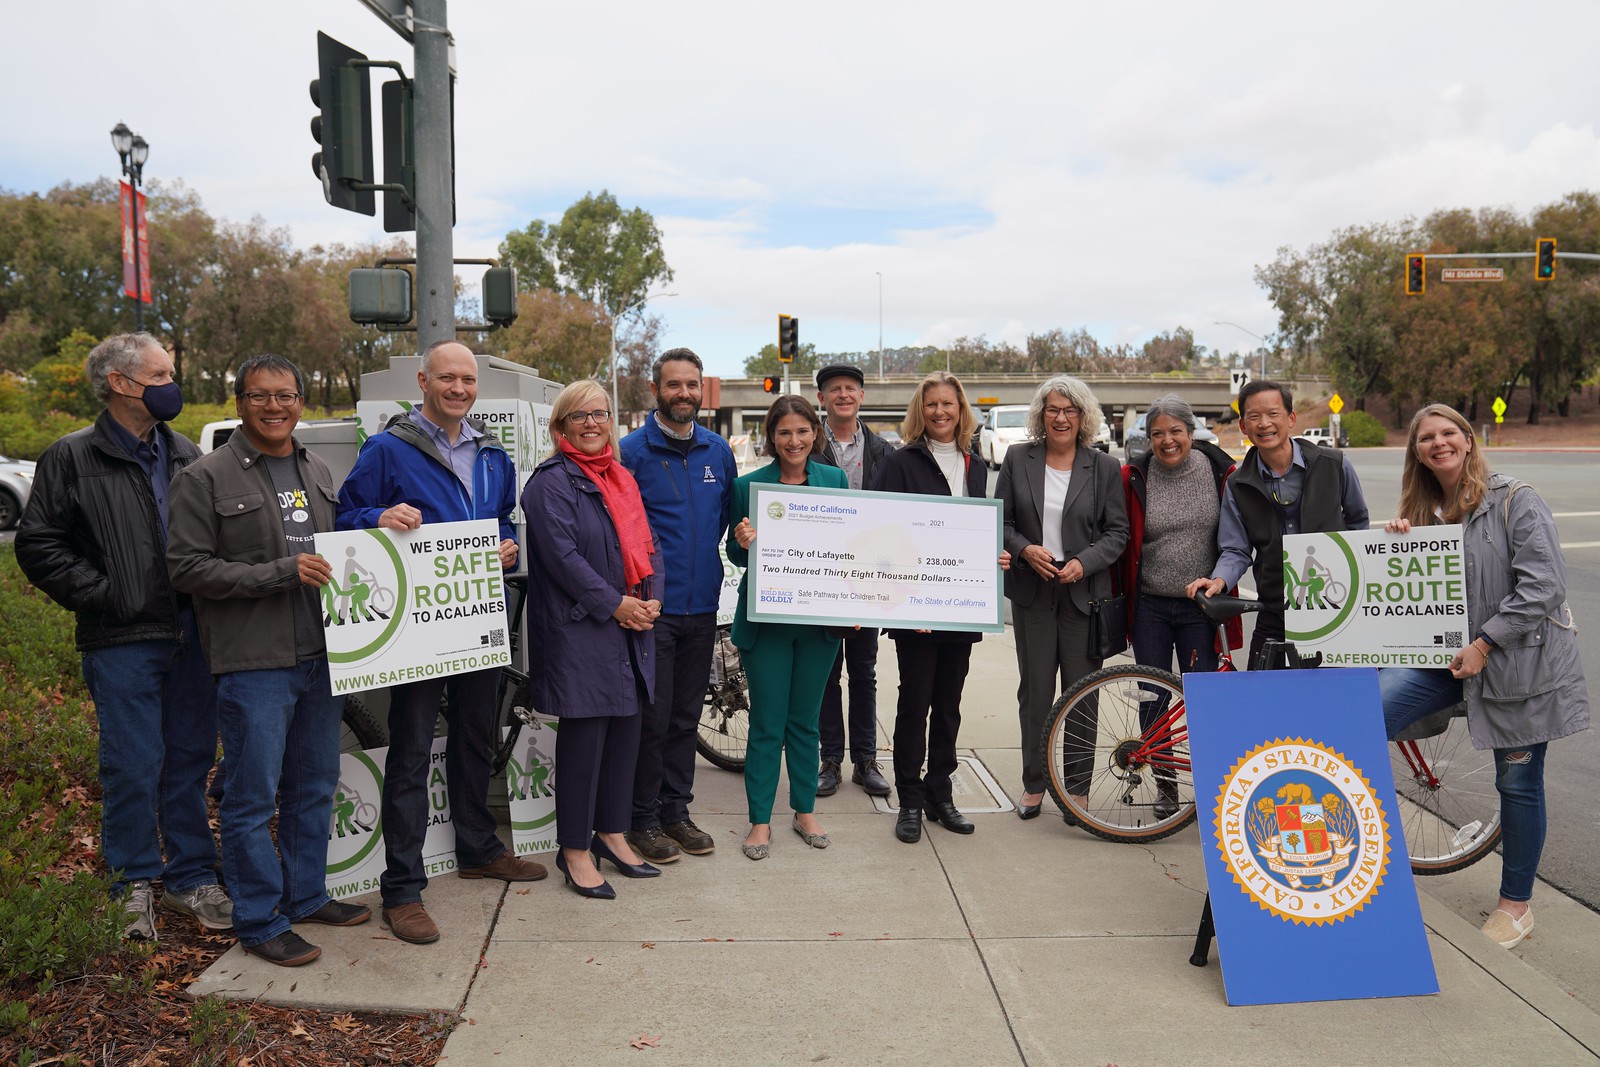 An image of a group of people, including Assemblymember Bauer-Kahan. They are holding signs to show their support for the project. The Assemblymember is holding an oversized check made out to the City of Lafayette.